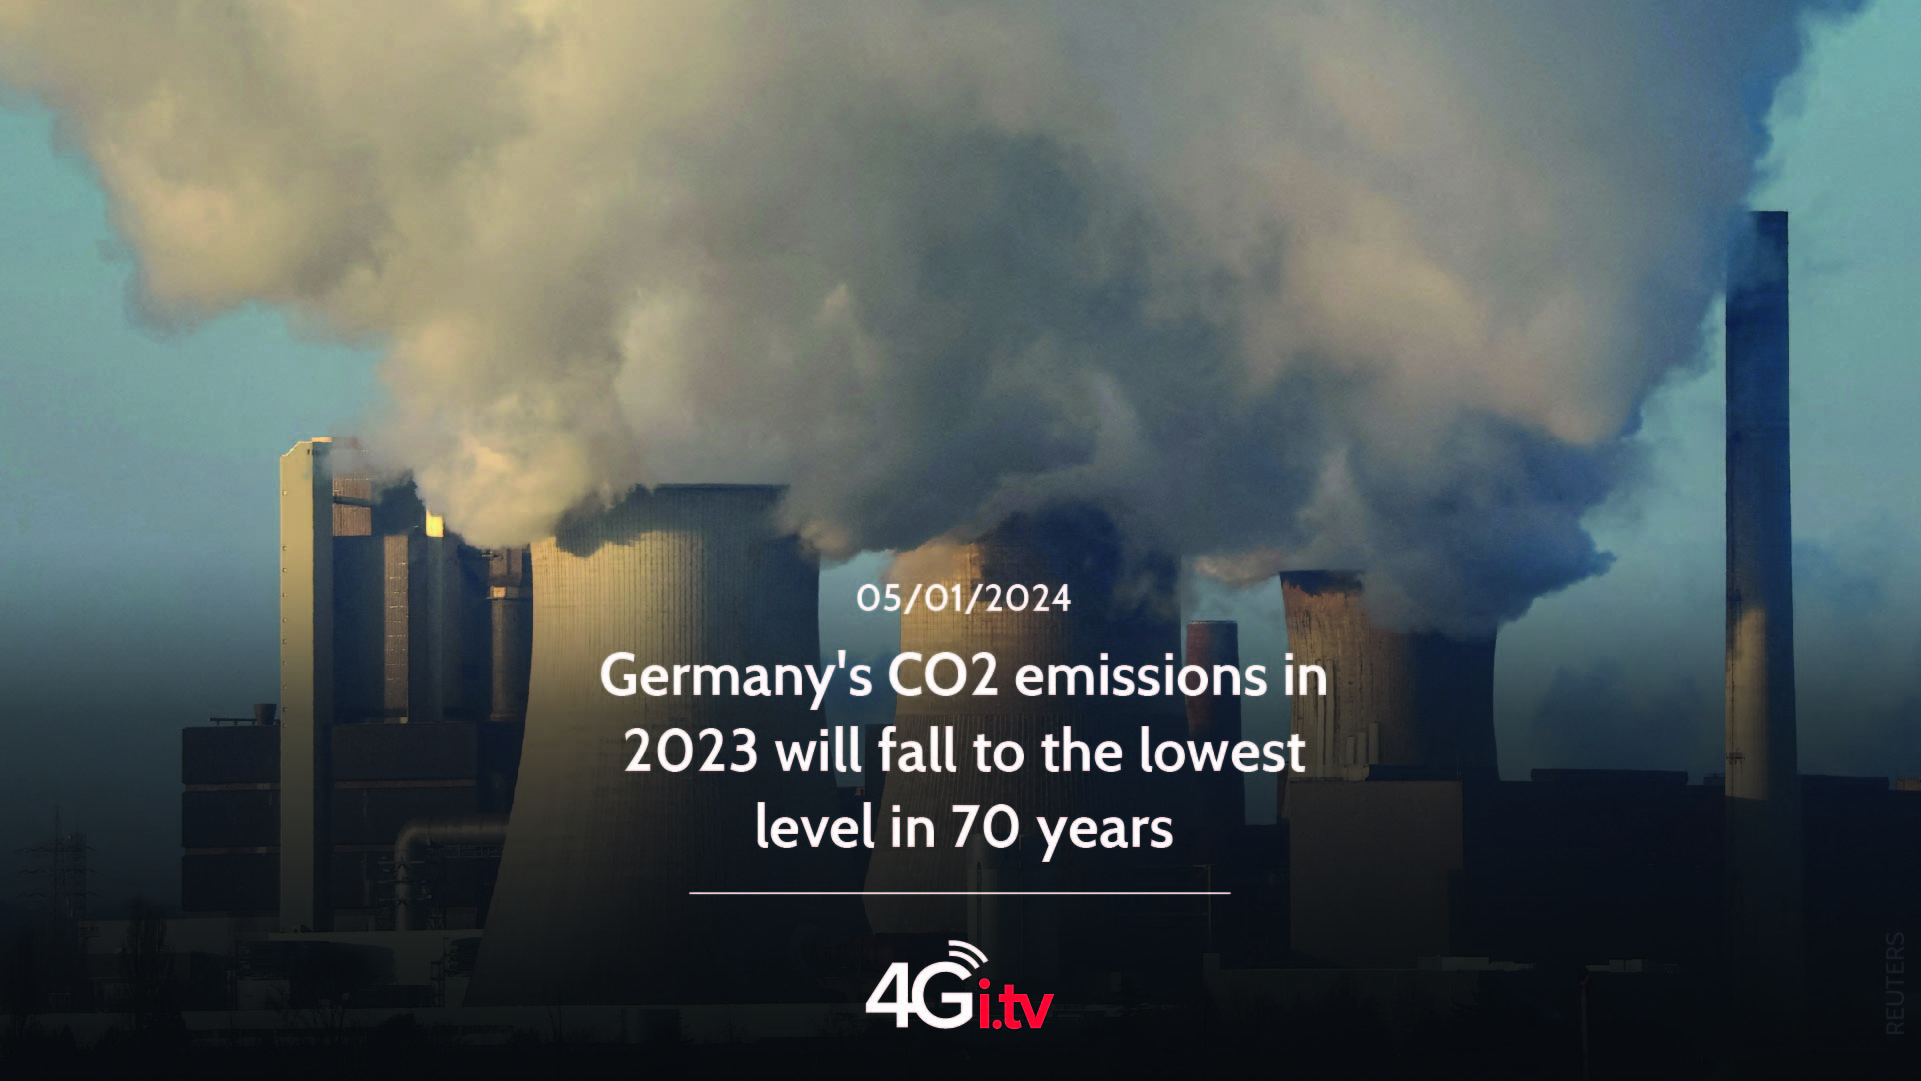 Lesen Sie mehr über den Artikel Germany’s CO2 emissions in 2023 will fall to the lowest level in 70 years